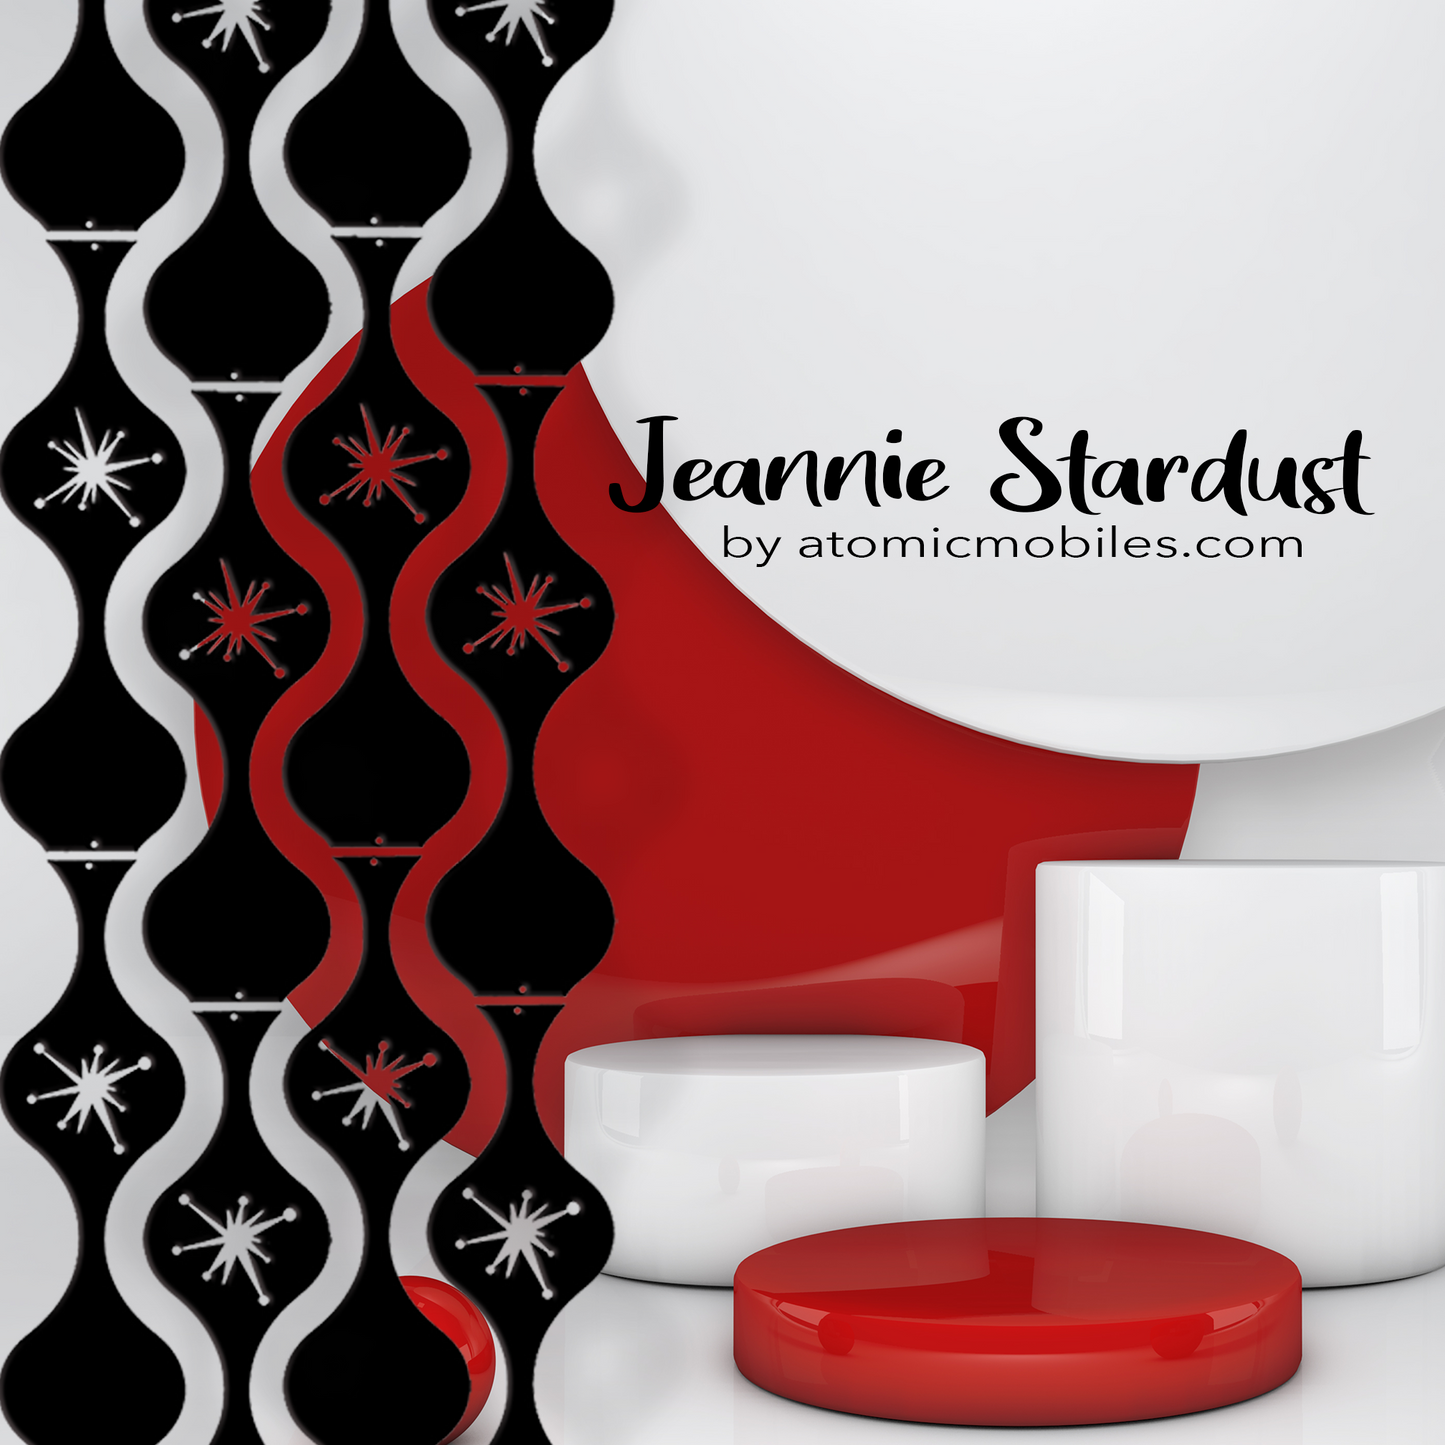 Jeannie Stardust Retro Room Mobile in black with mid century modern starburst cutouts by AtomicMobiles.com